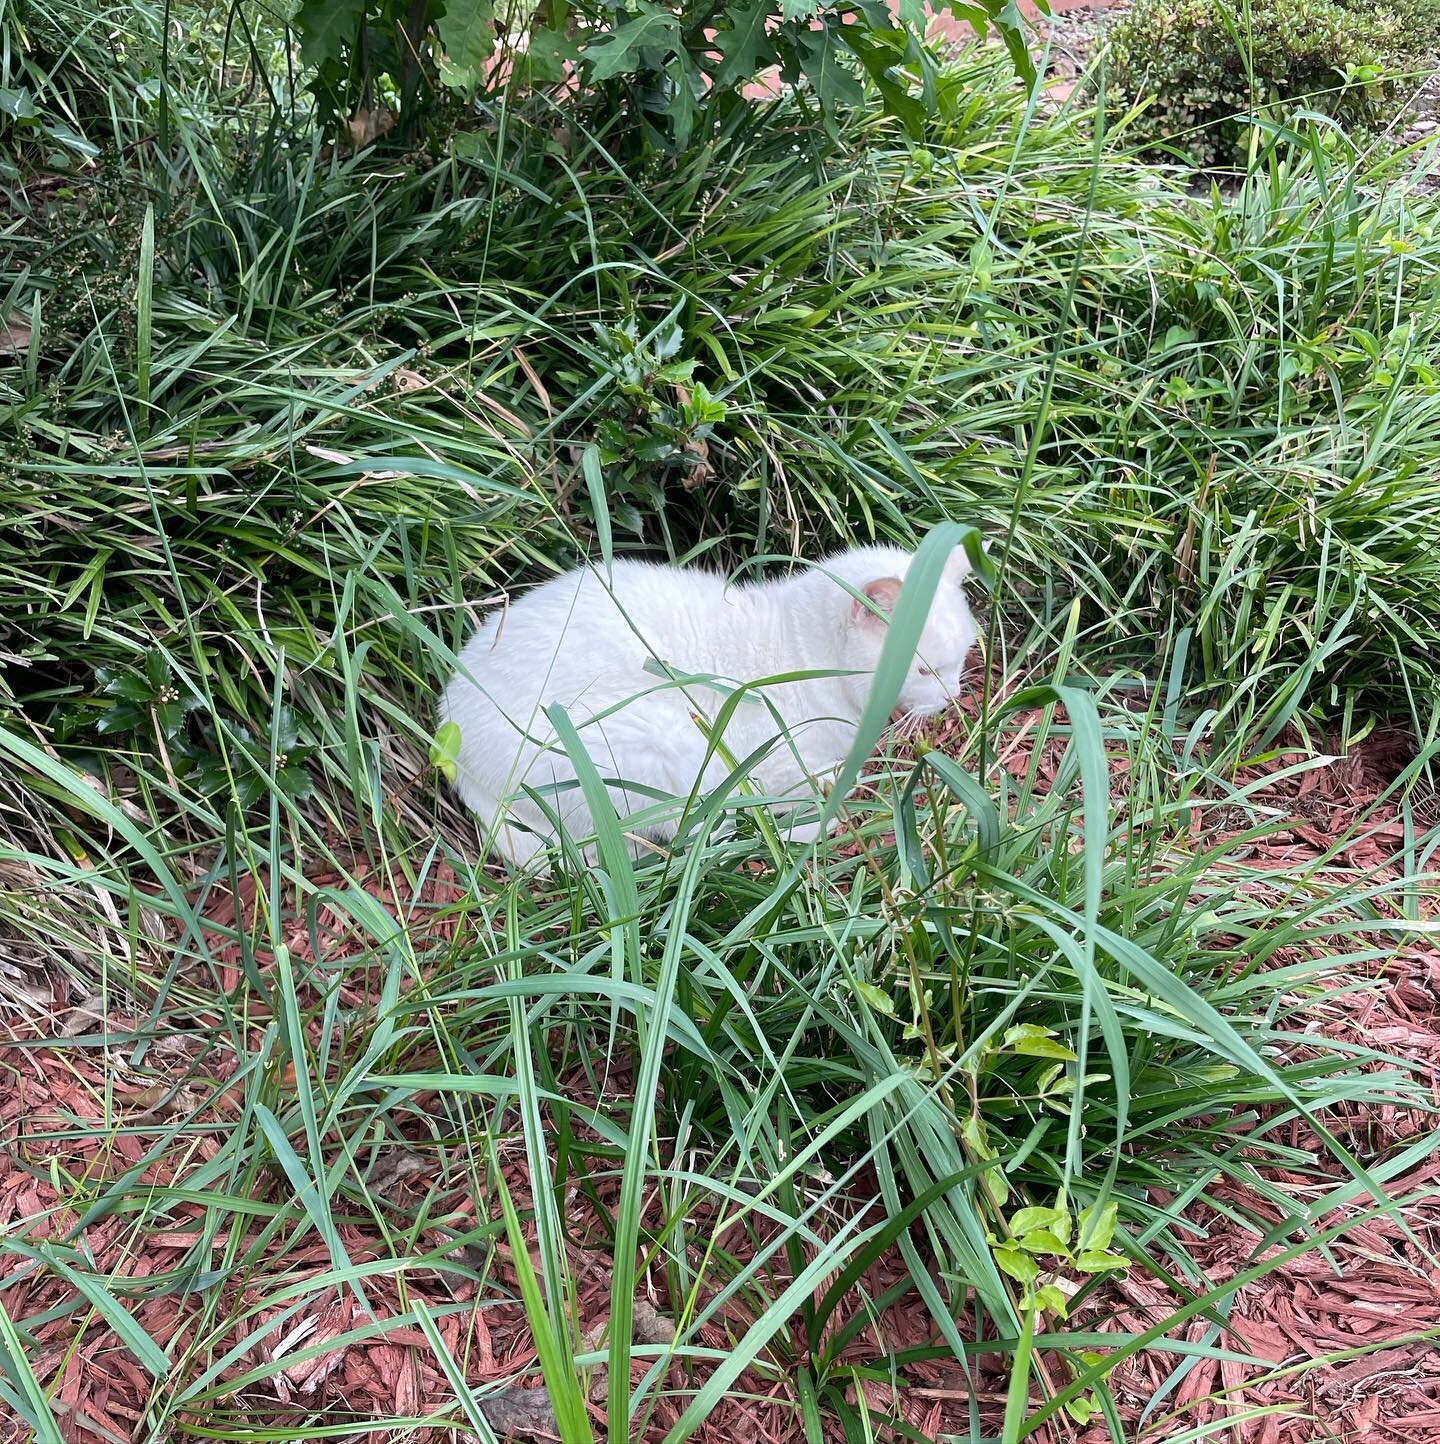 Saw this fluffy white plant growing in a neighbors yard. Not sure of the type but it was very soft. 😹